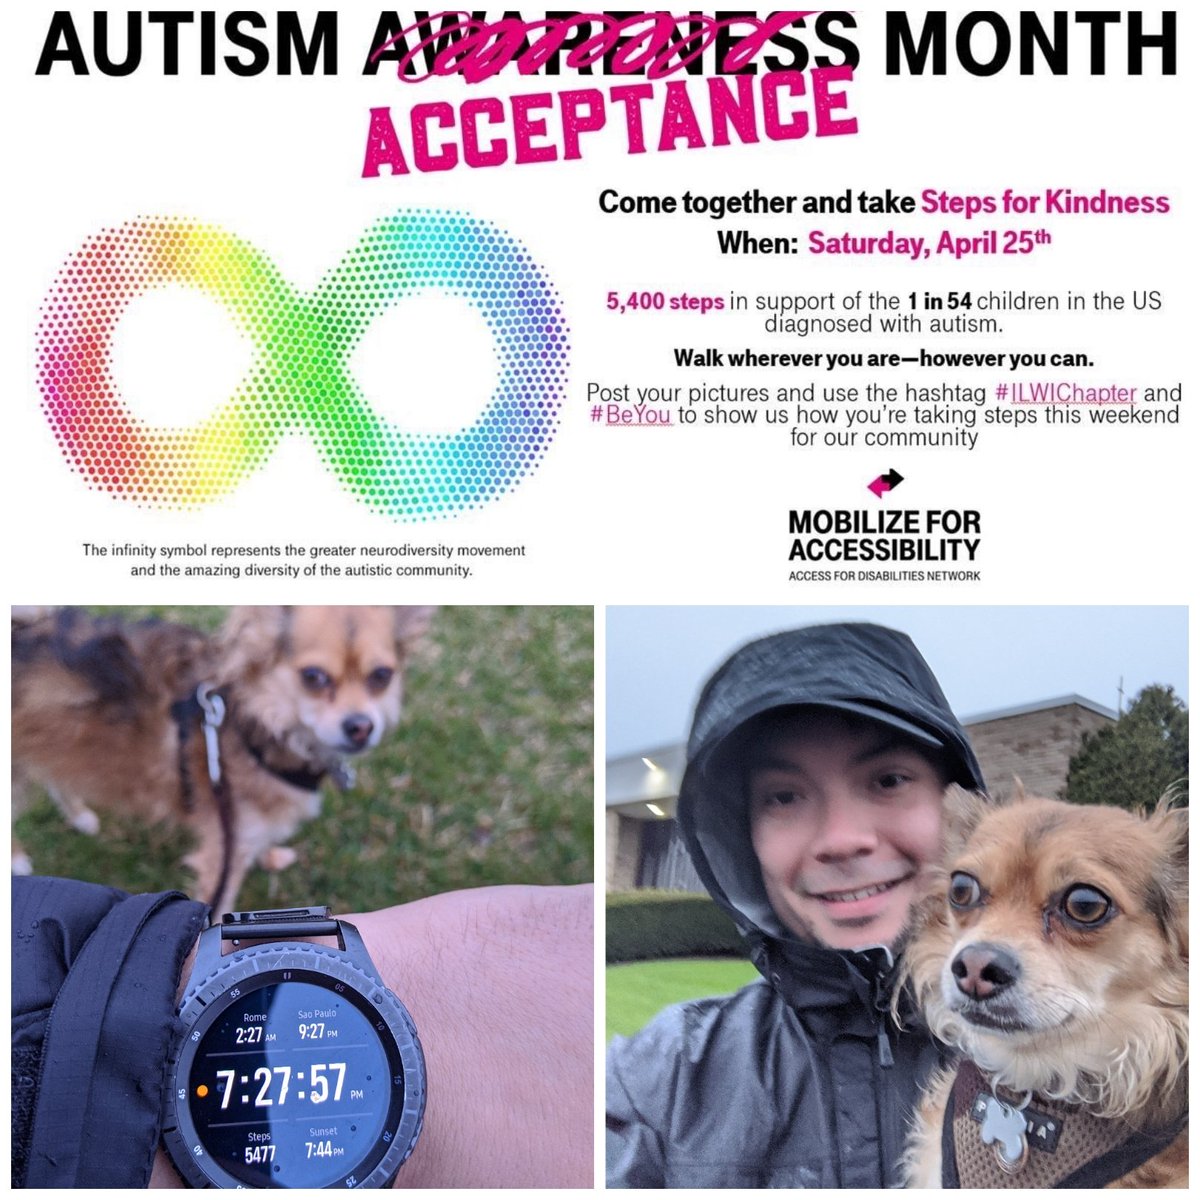 5,400 steps in today for #AutismAcceptanceMonth with my dog Pepe! ♾️💪🏼 #ILWIChapter #BeYou !